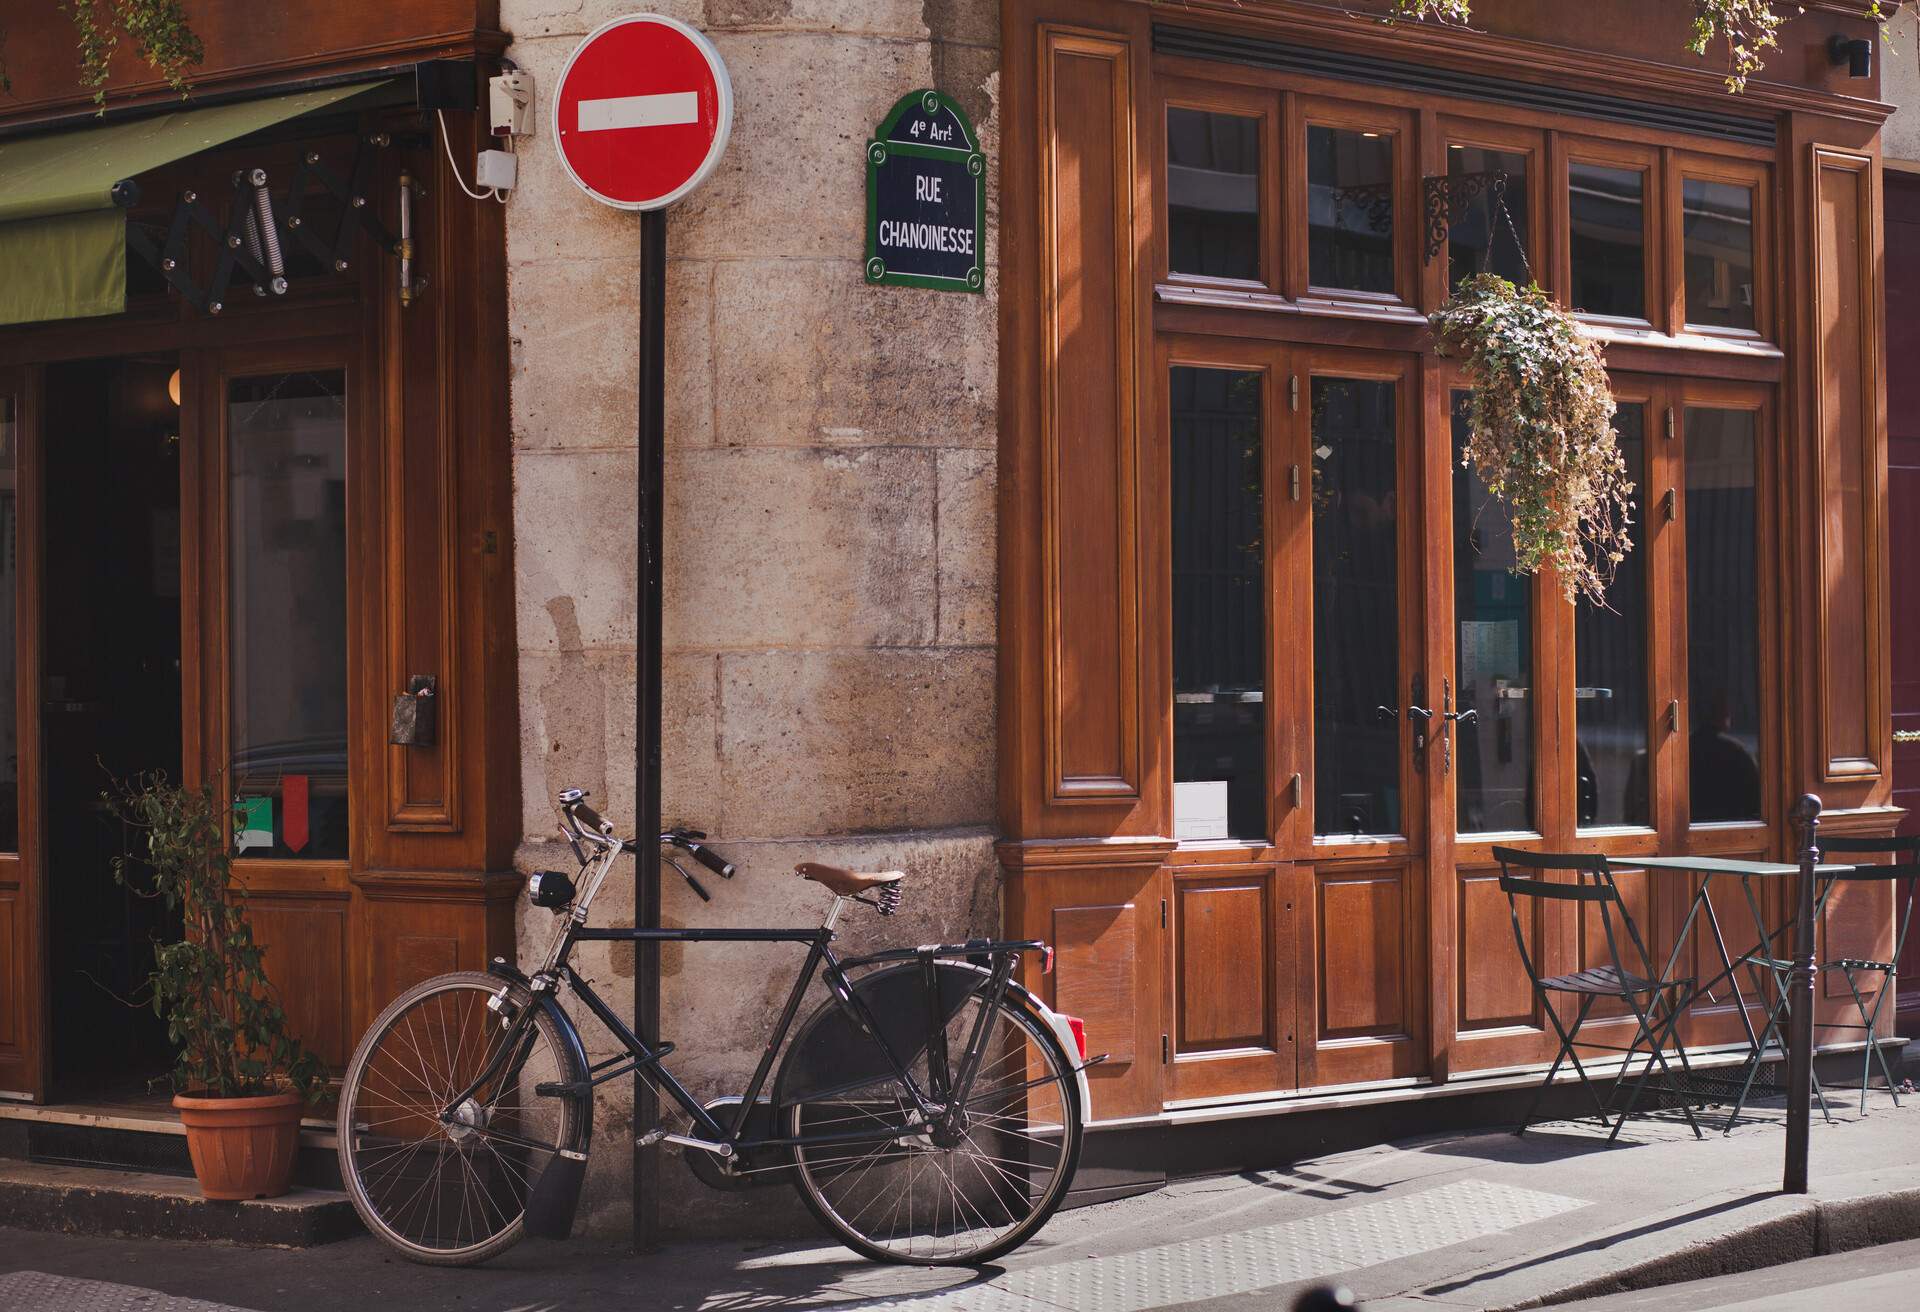 Paris street and bicycle, traditional restaurant front window